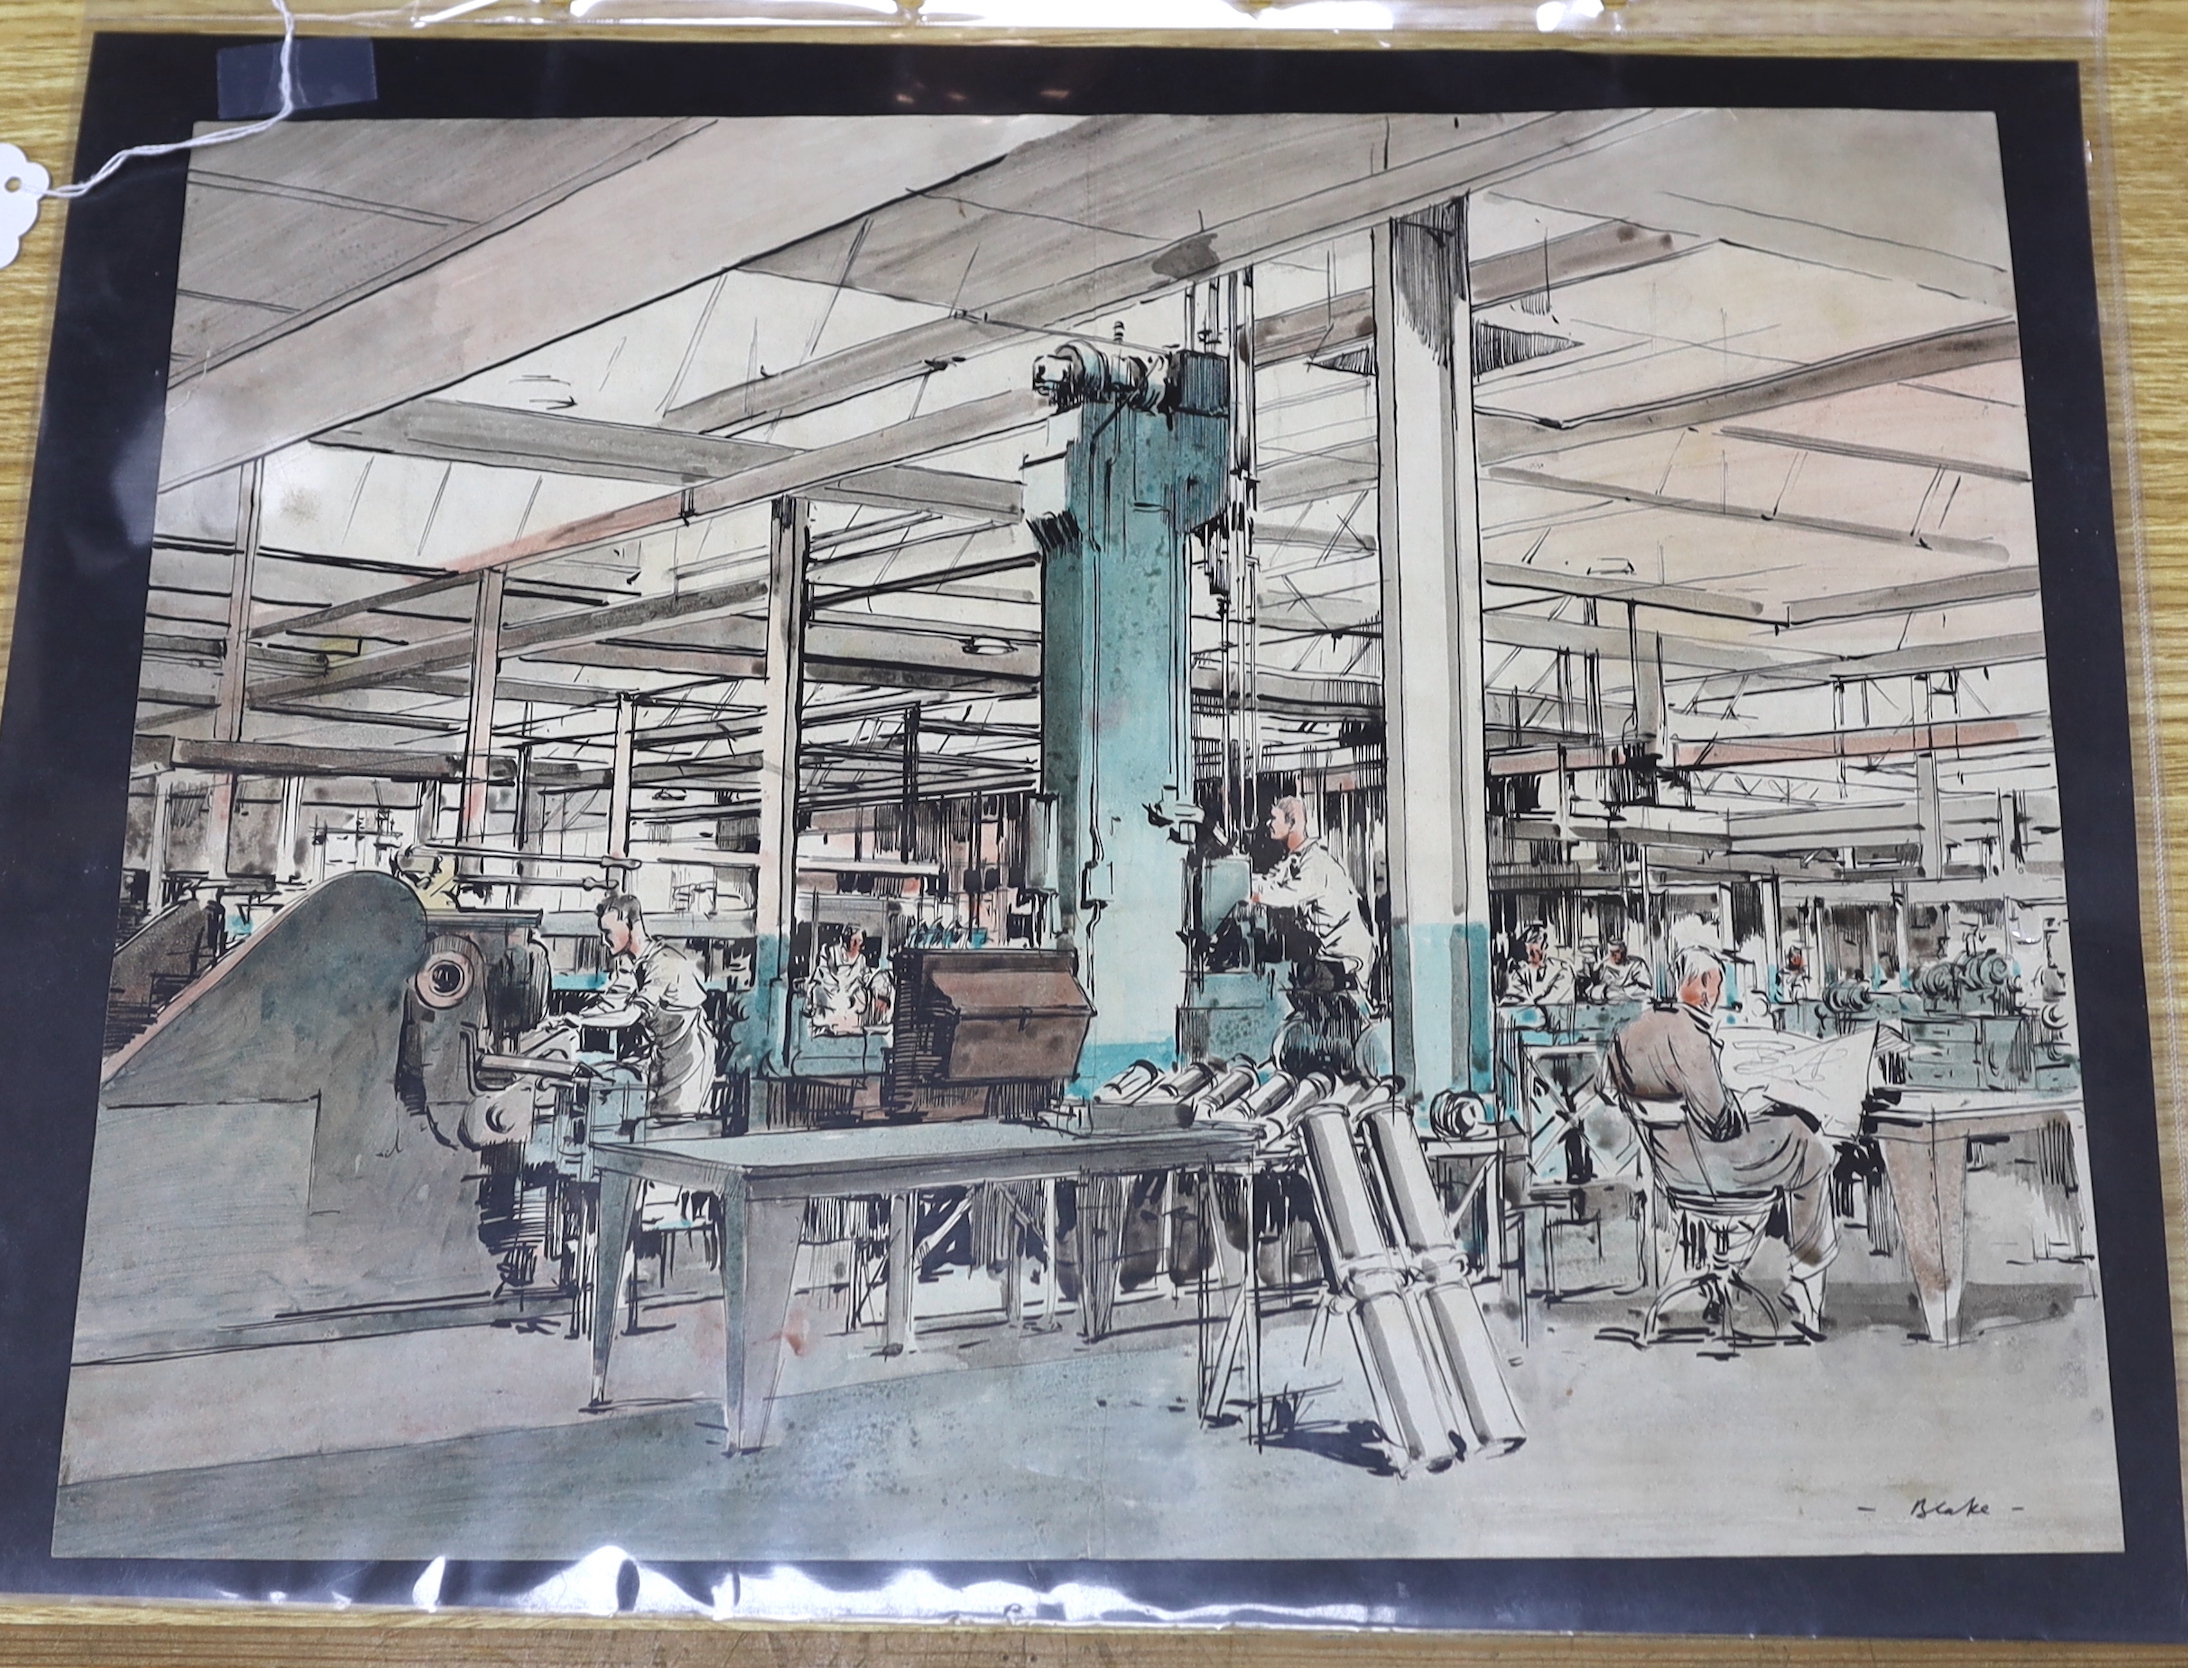 Frederick Donald Blake (War artist, Scottish, 1908-1997), ink and watercolour on paper, Factory scene, possibly for munitions, signed, 32 x 40cm, unframed